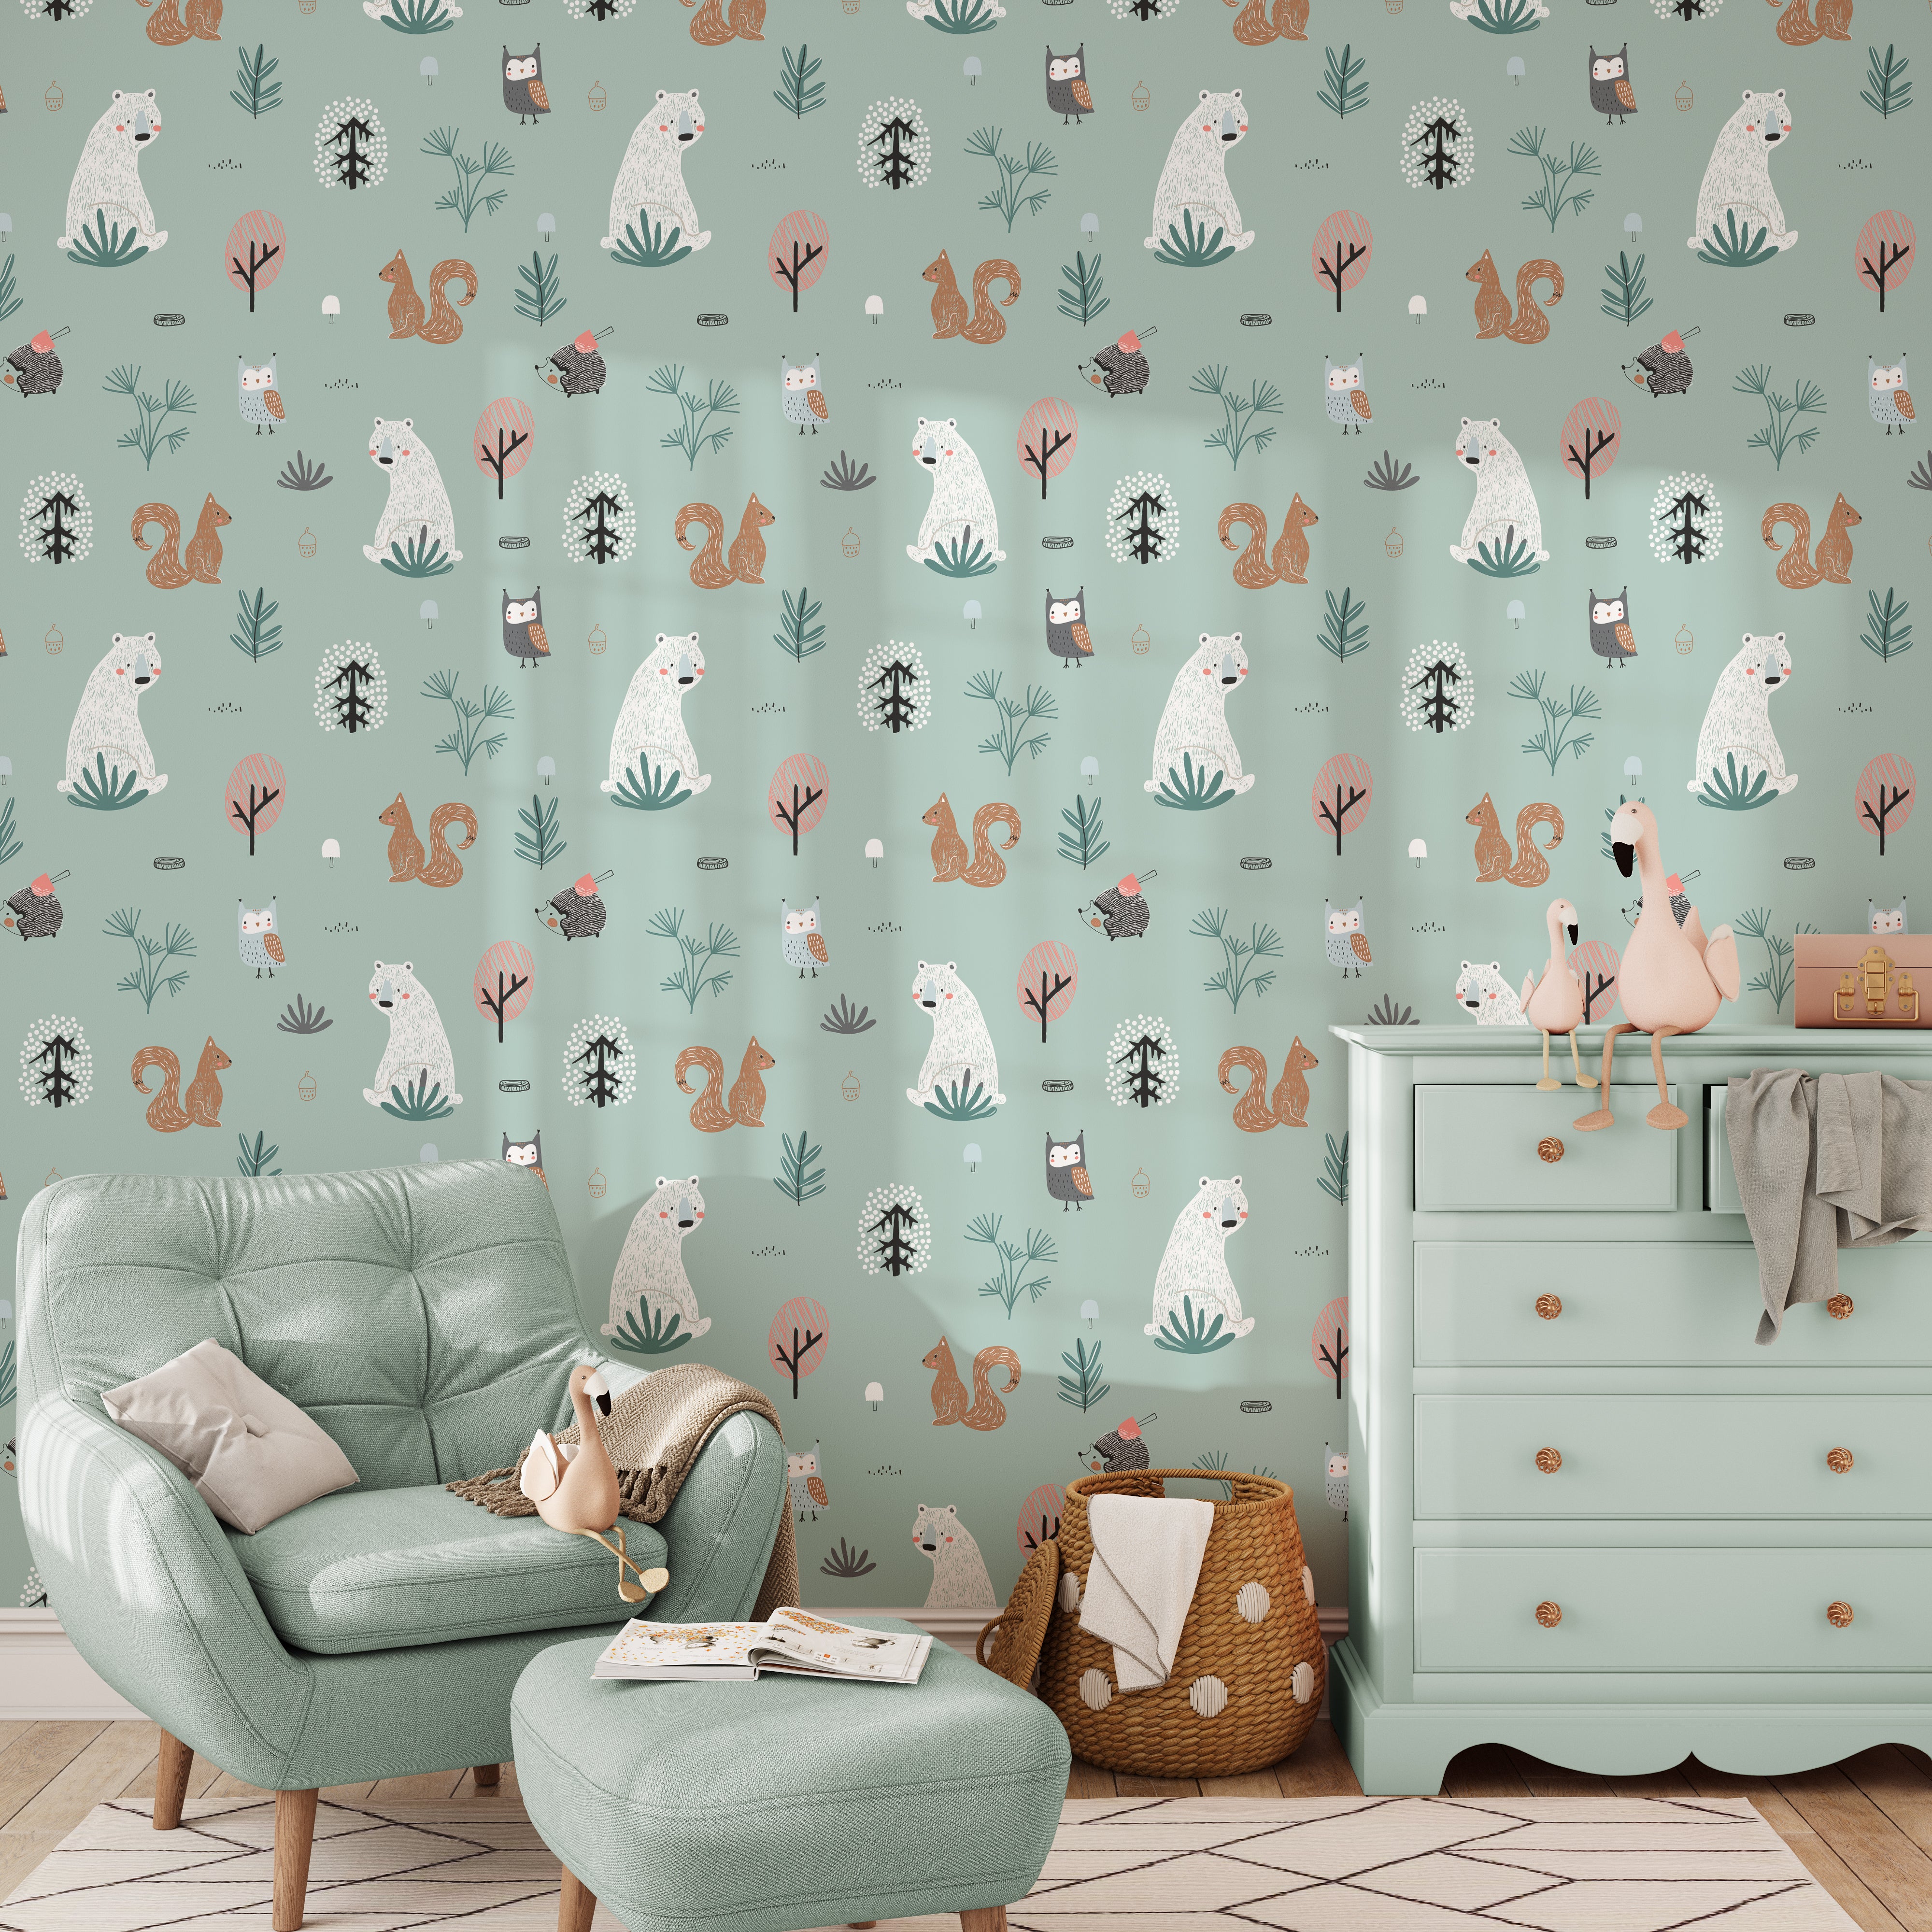 A cozy corner of a room features the "Kids Wallpaper - Forest Critters - 25 inches." The wallpaper, illustrating a serene forest scene with critters like bears and squirrels, complements the modern mint green armchair and minimalist decor, ideal for a reading nook or a child’s play area.